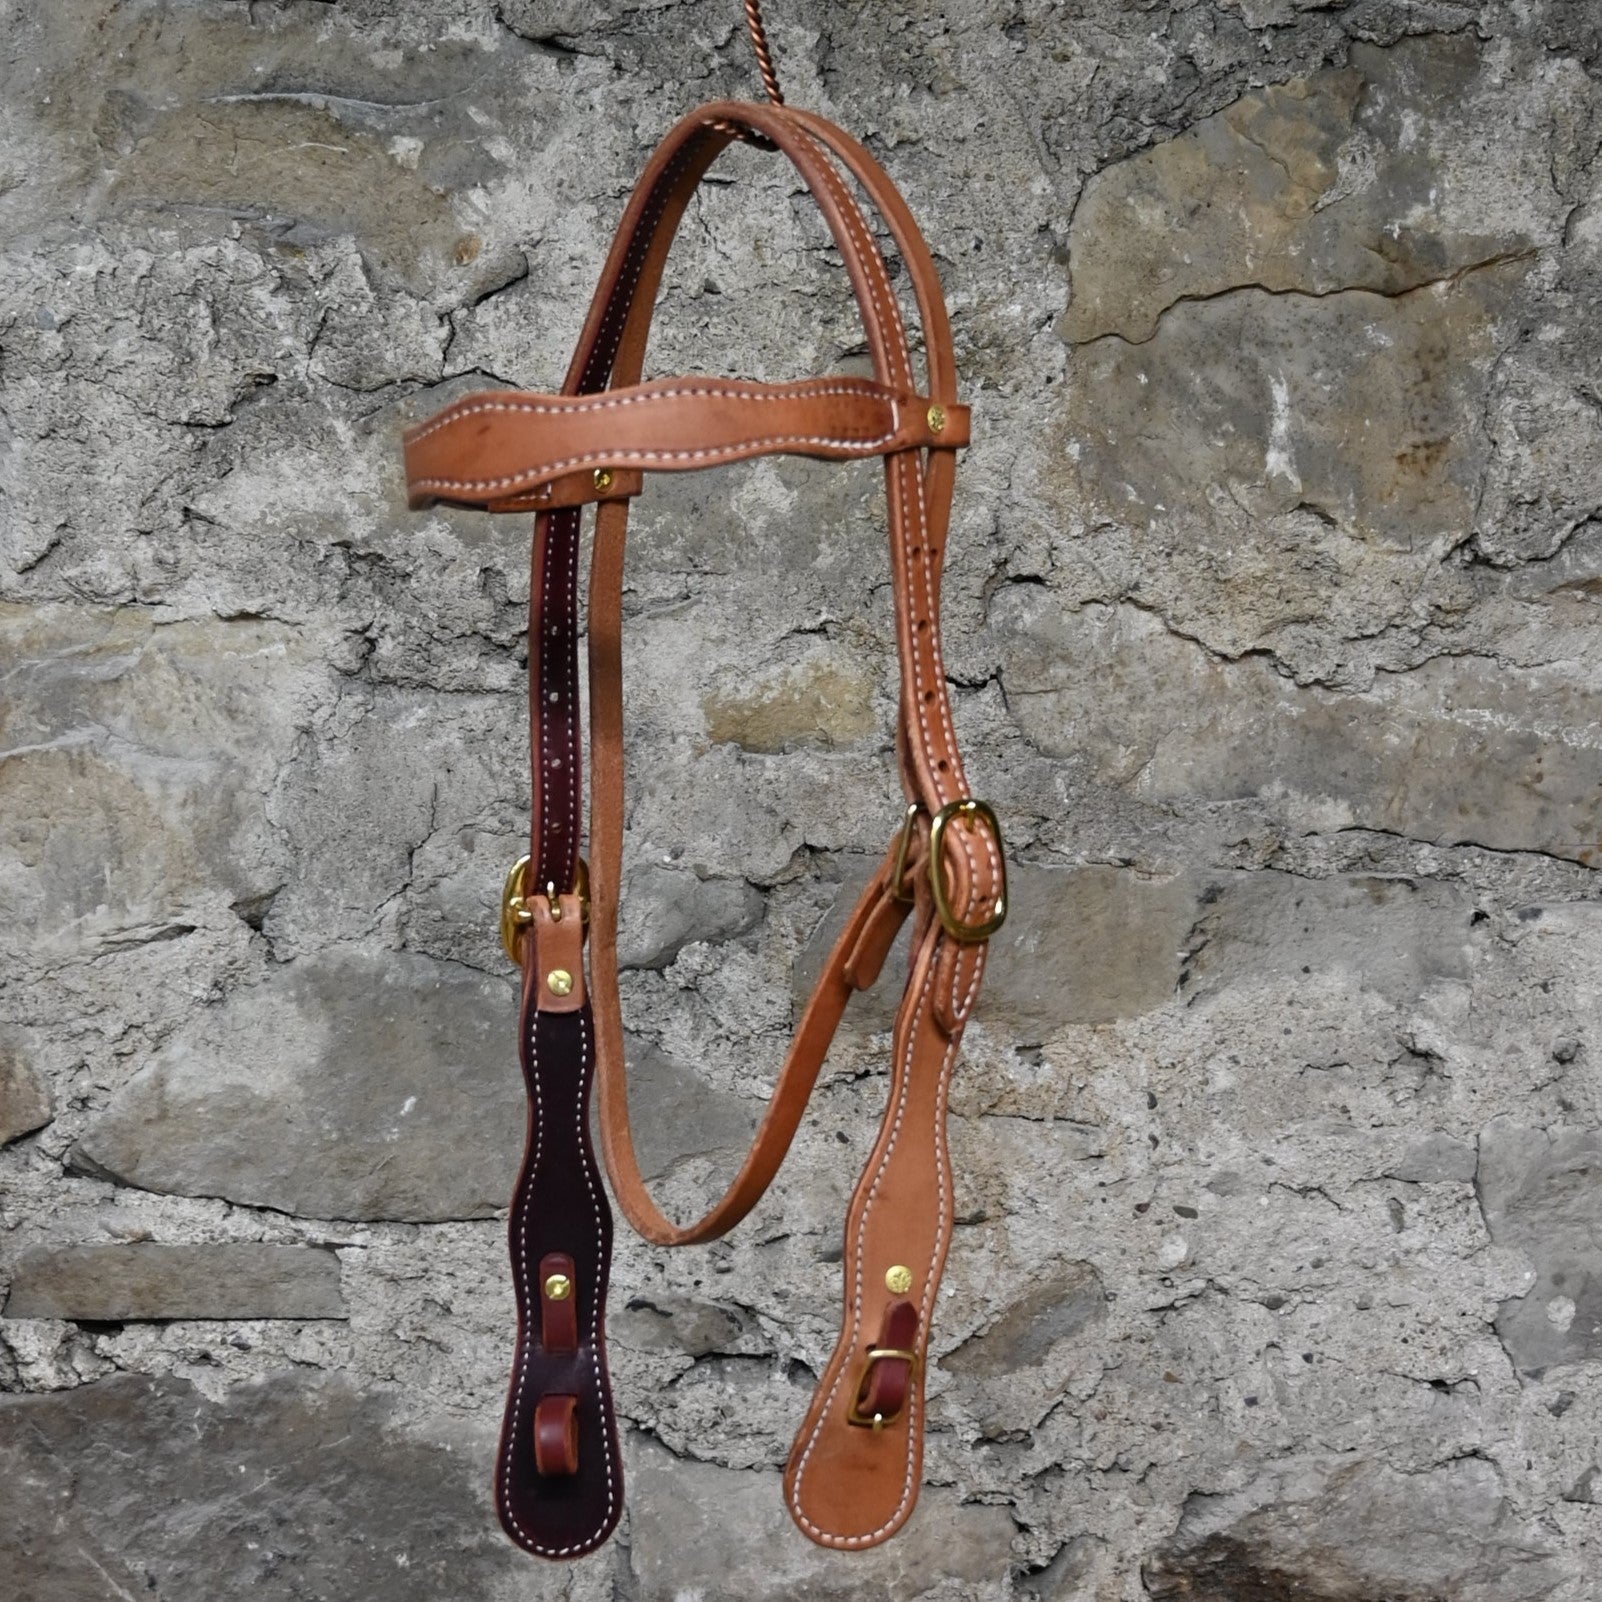 Cowboy Headstall view of headstall